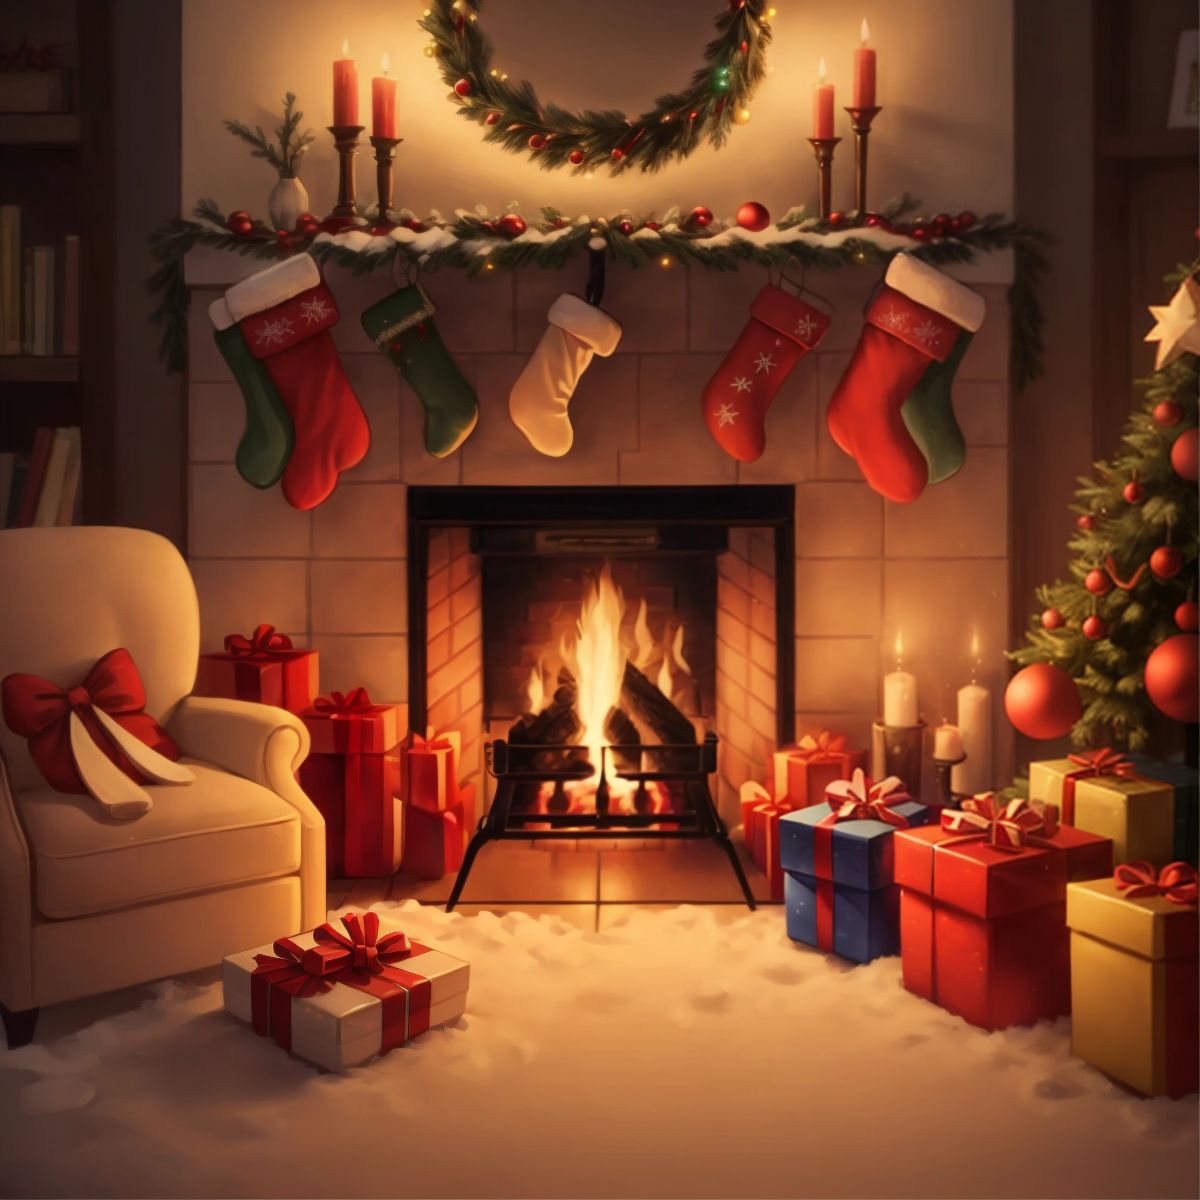 A cozy Christmas Eve scene with a fireplace and stockings, but no characters present.